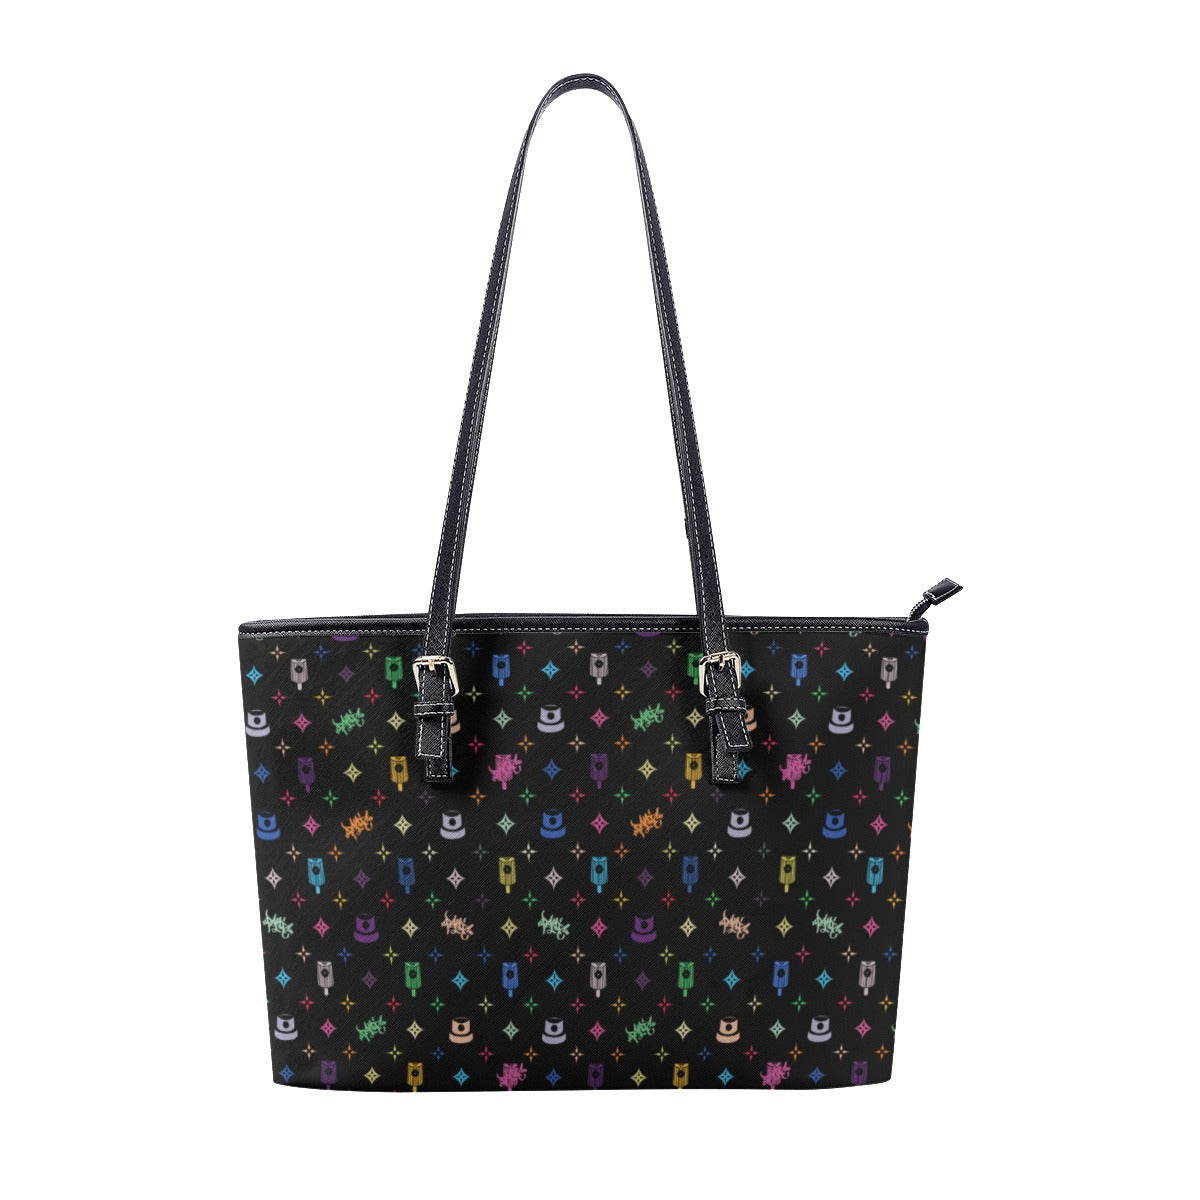 THE LOUIE FAUX LEATHER TOTE BAG - Panic 39